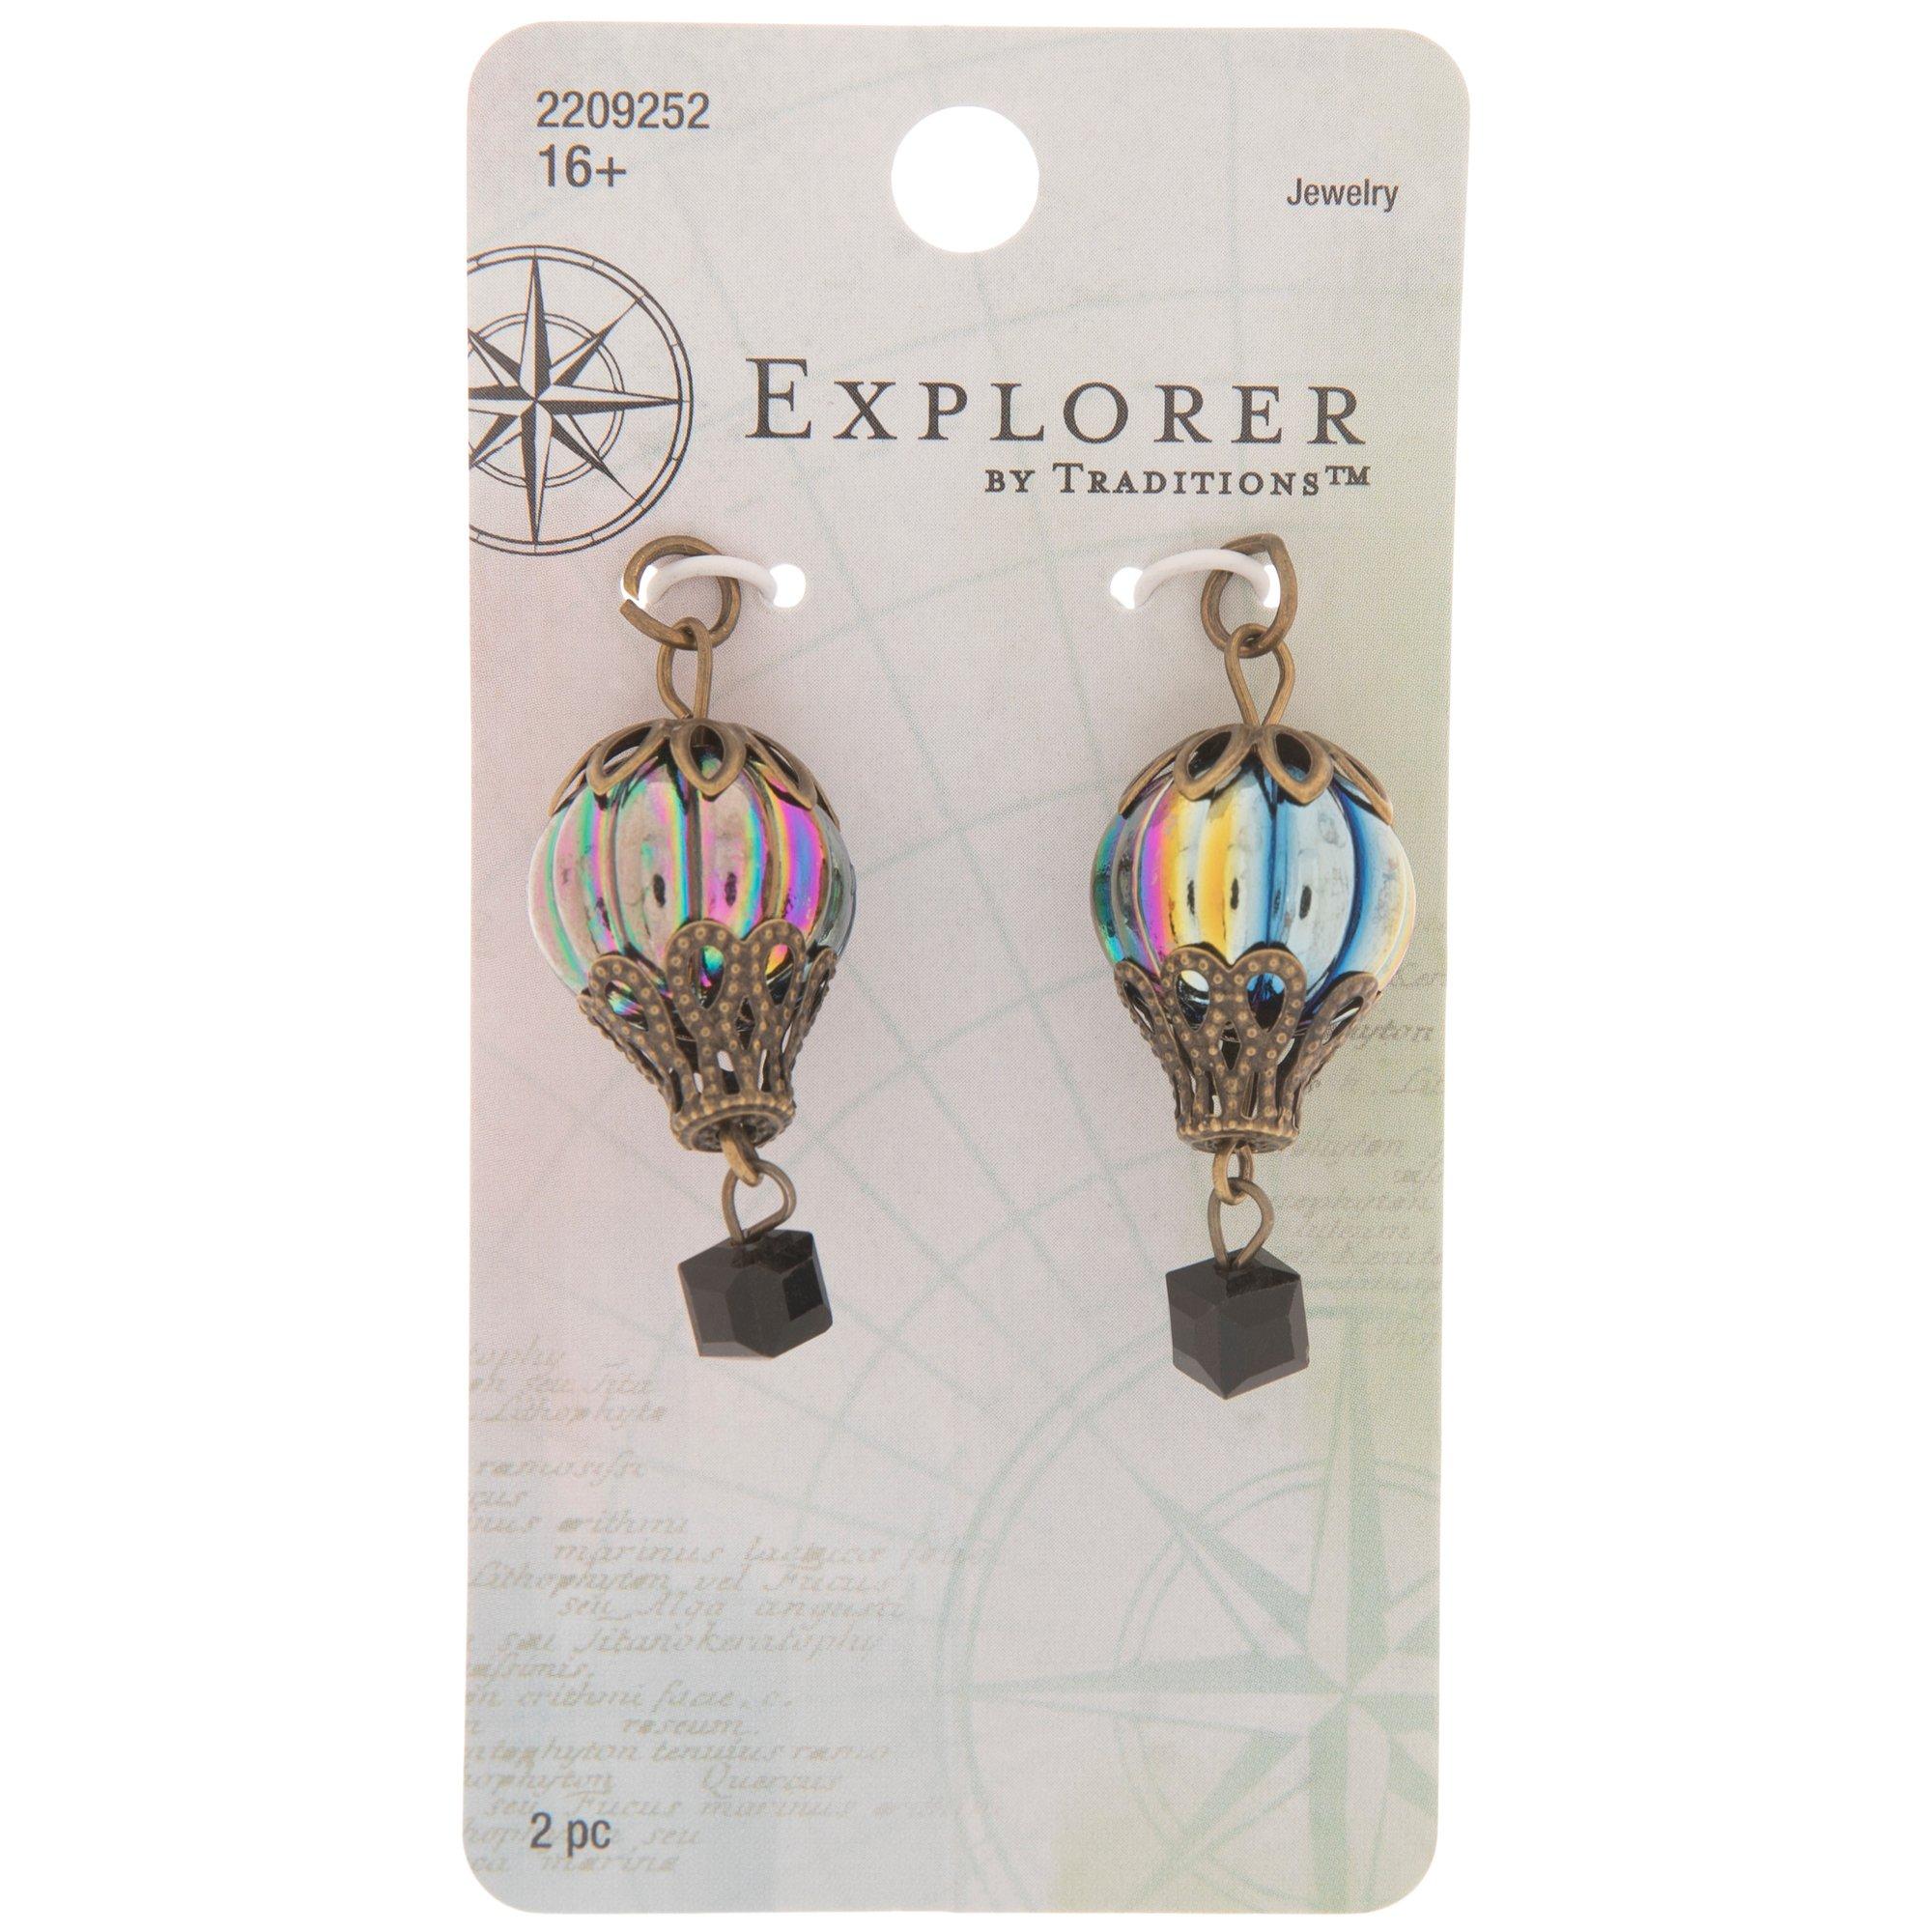 Hot Air Balloon Charm - 2 For Sale on 1stDibs